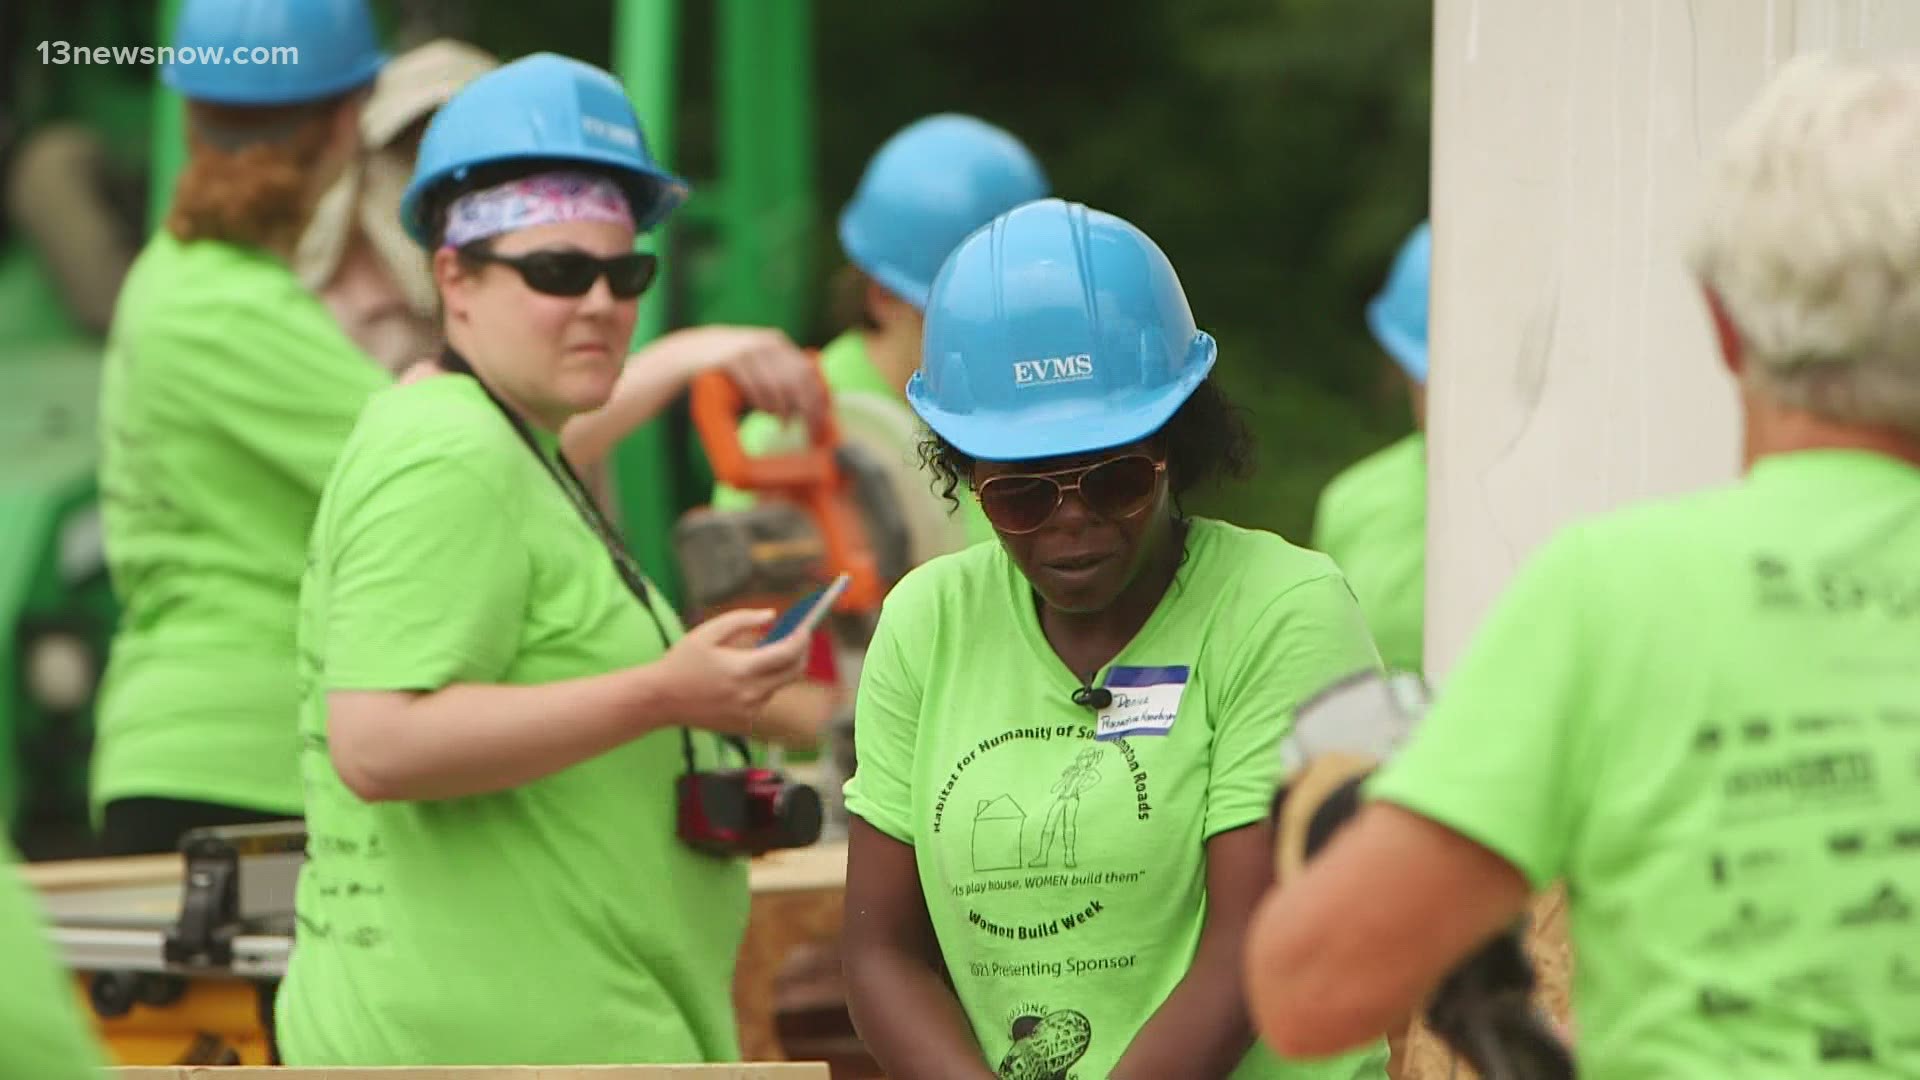 Habit for Humanity is hosting "Women's Build Week," hoping to draw more women into the construction industry.